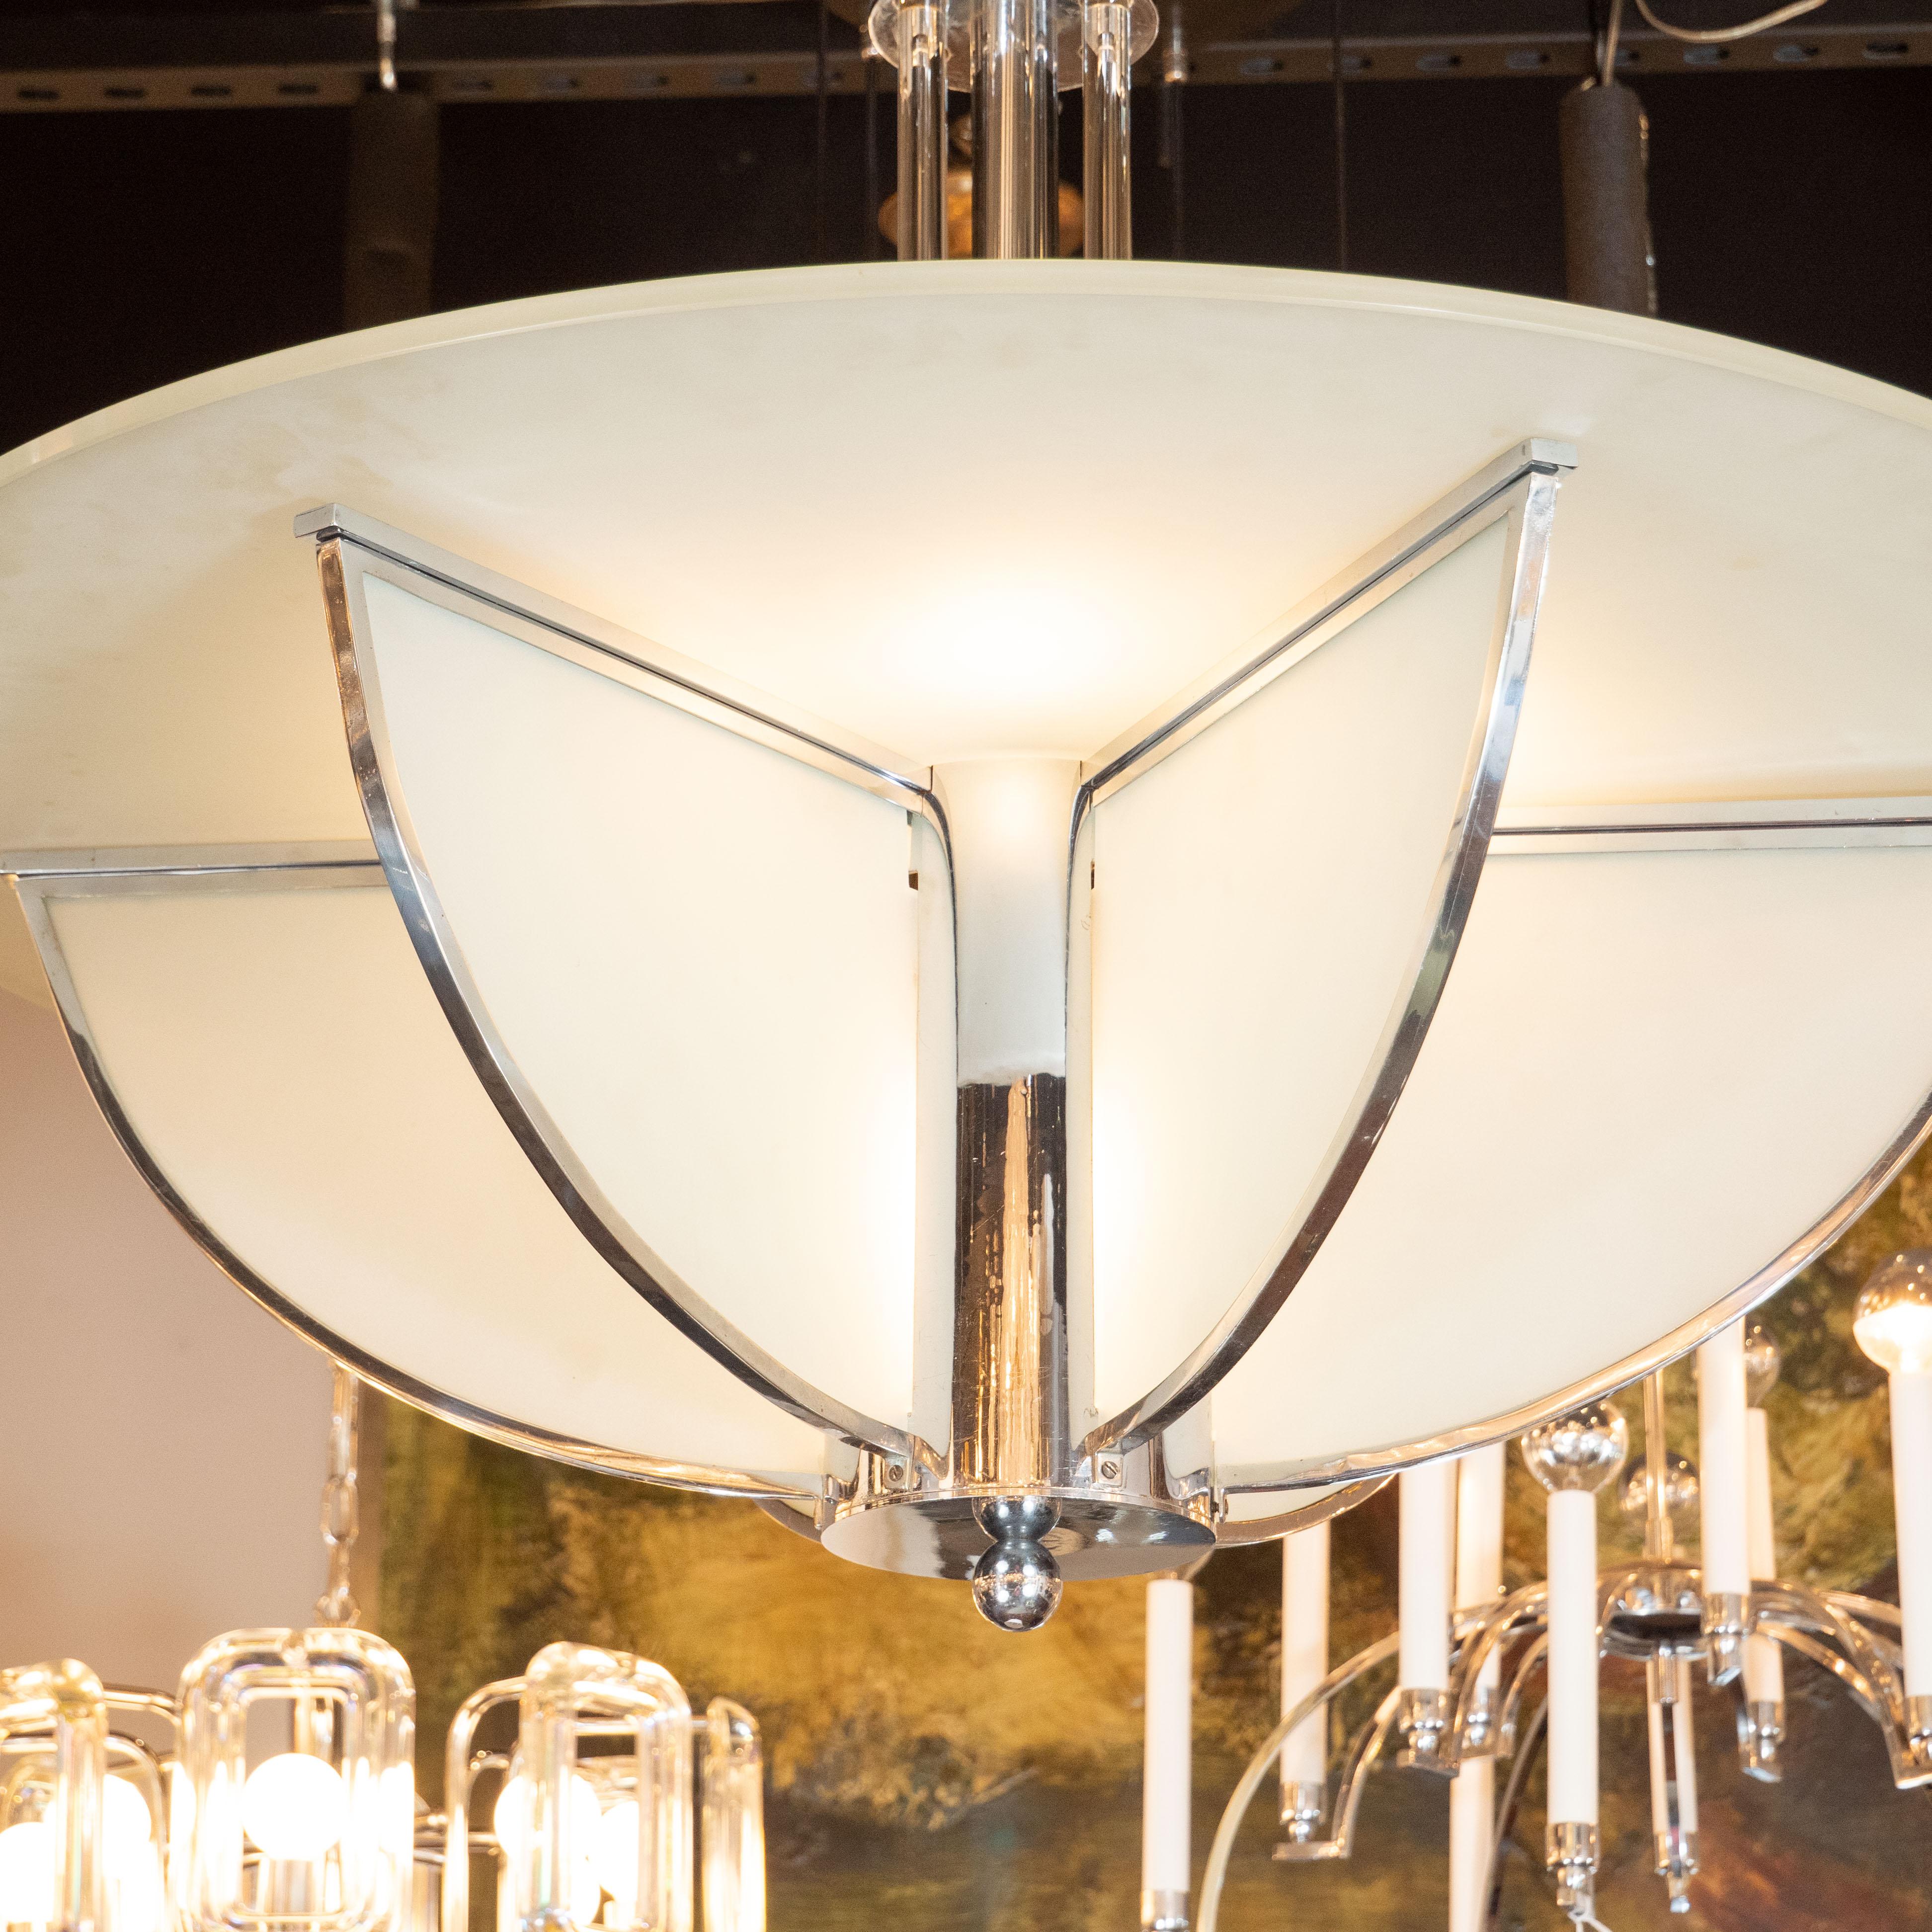 French Art Deco Machine Age Frosted Glass Chandelier, Chrome and Glass Rod Detailing